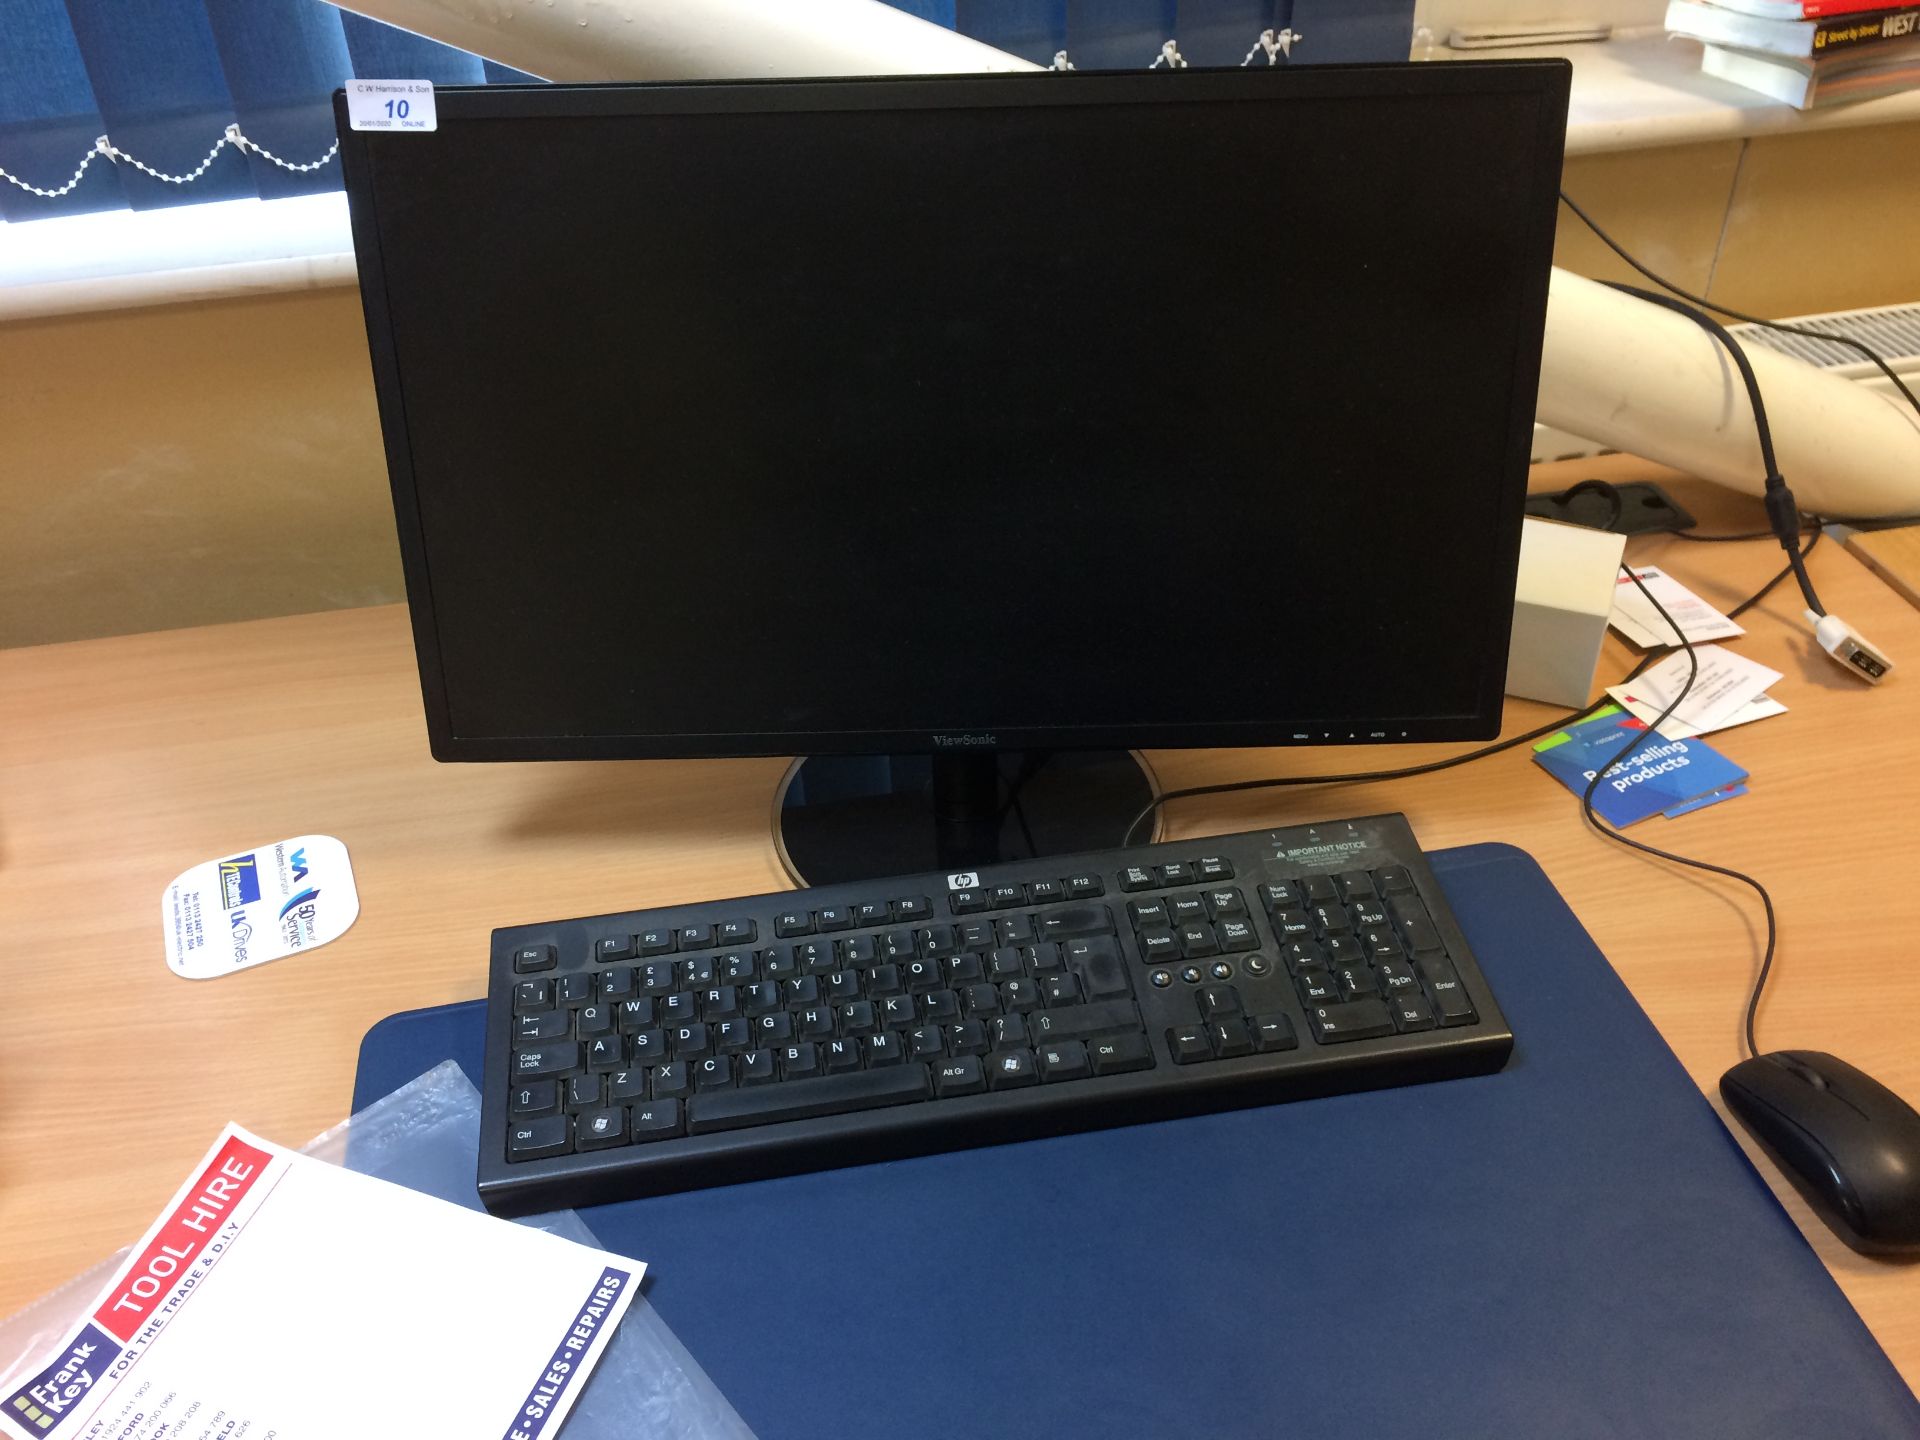 24" Viewsonic monitor, keyboard and mous